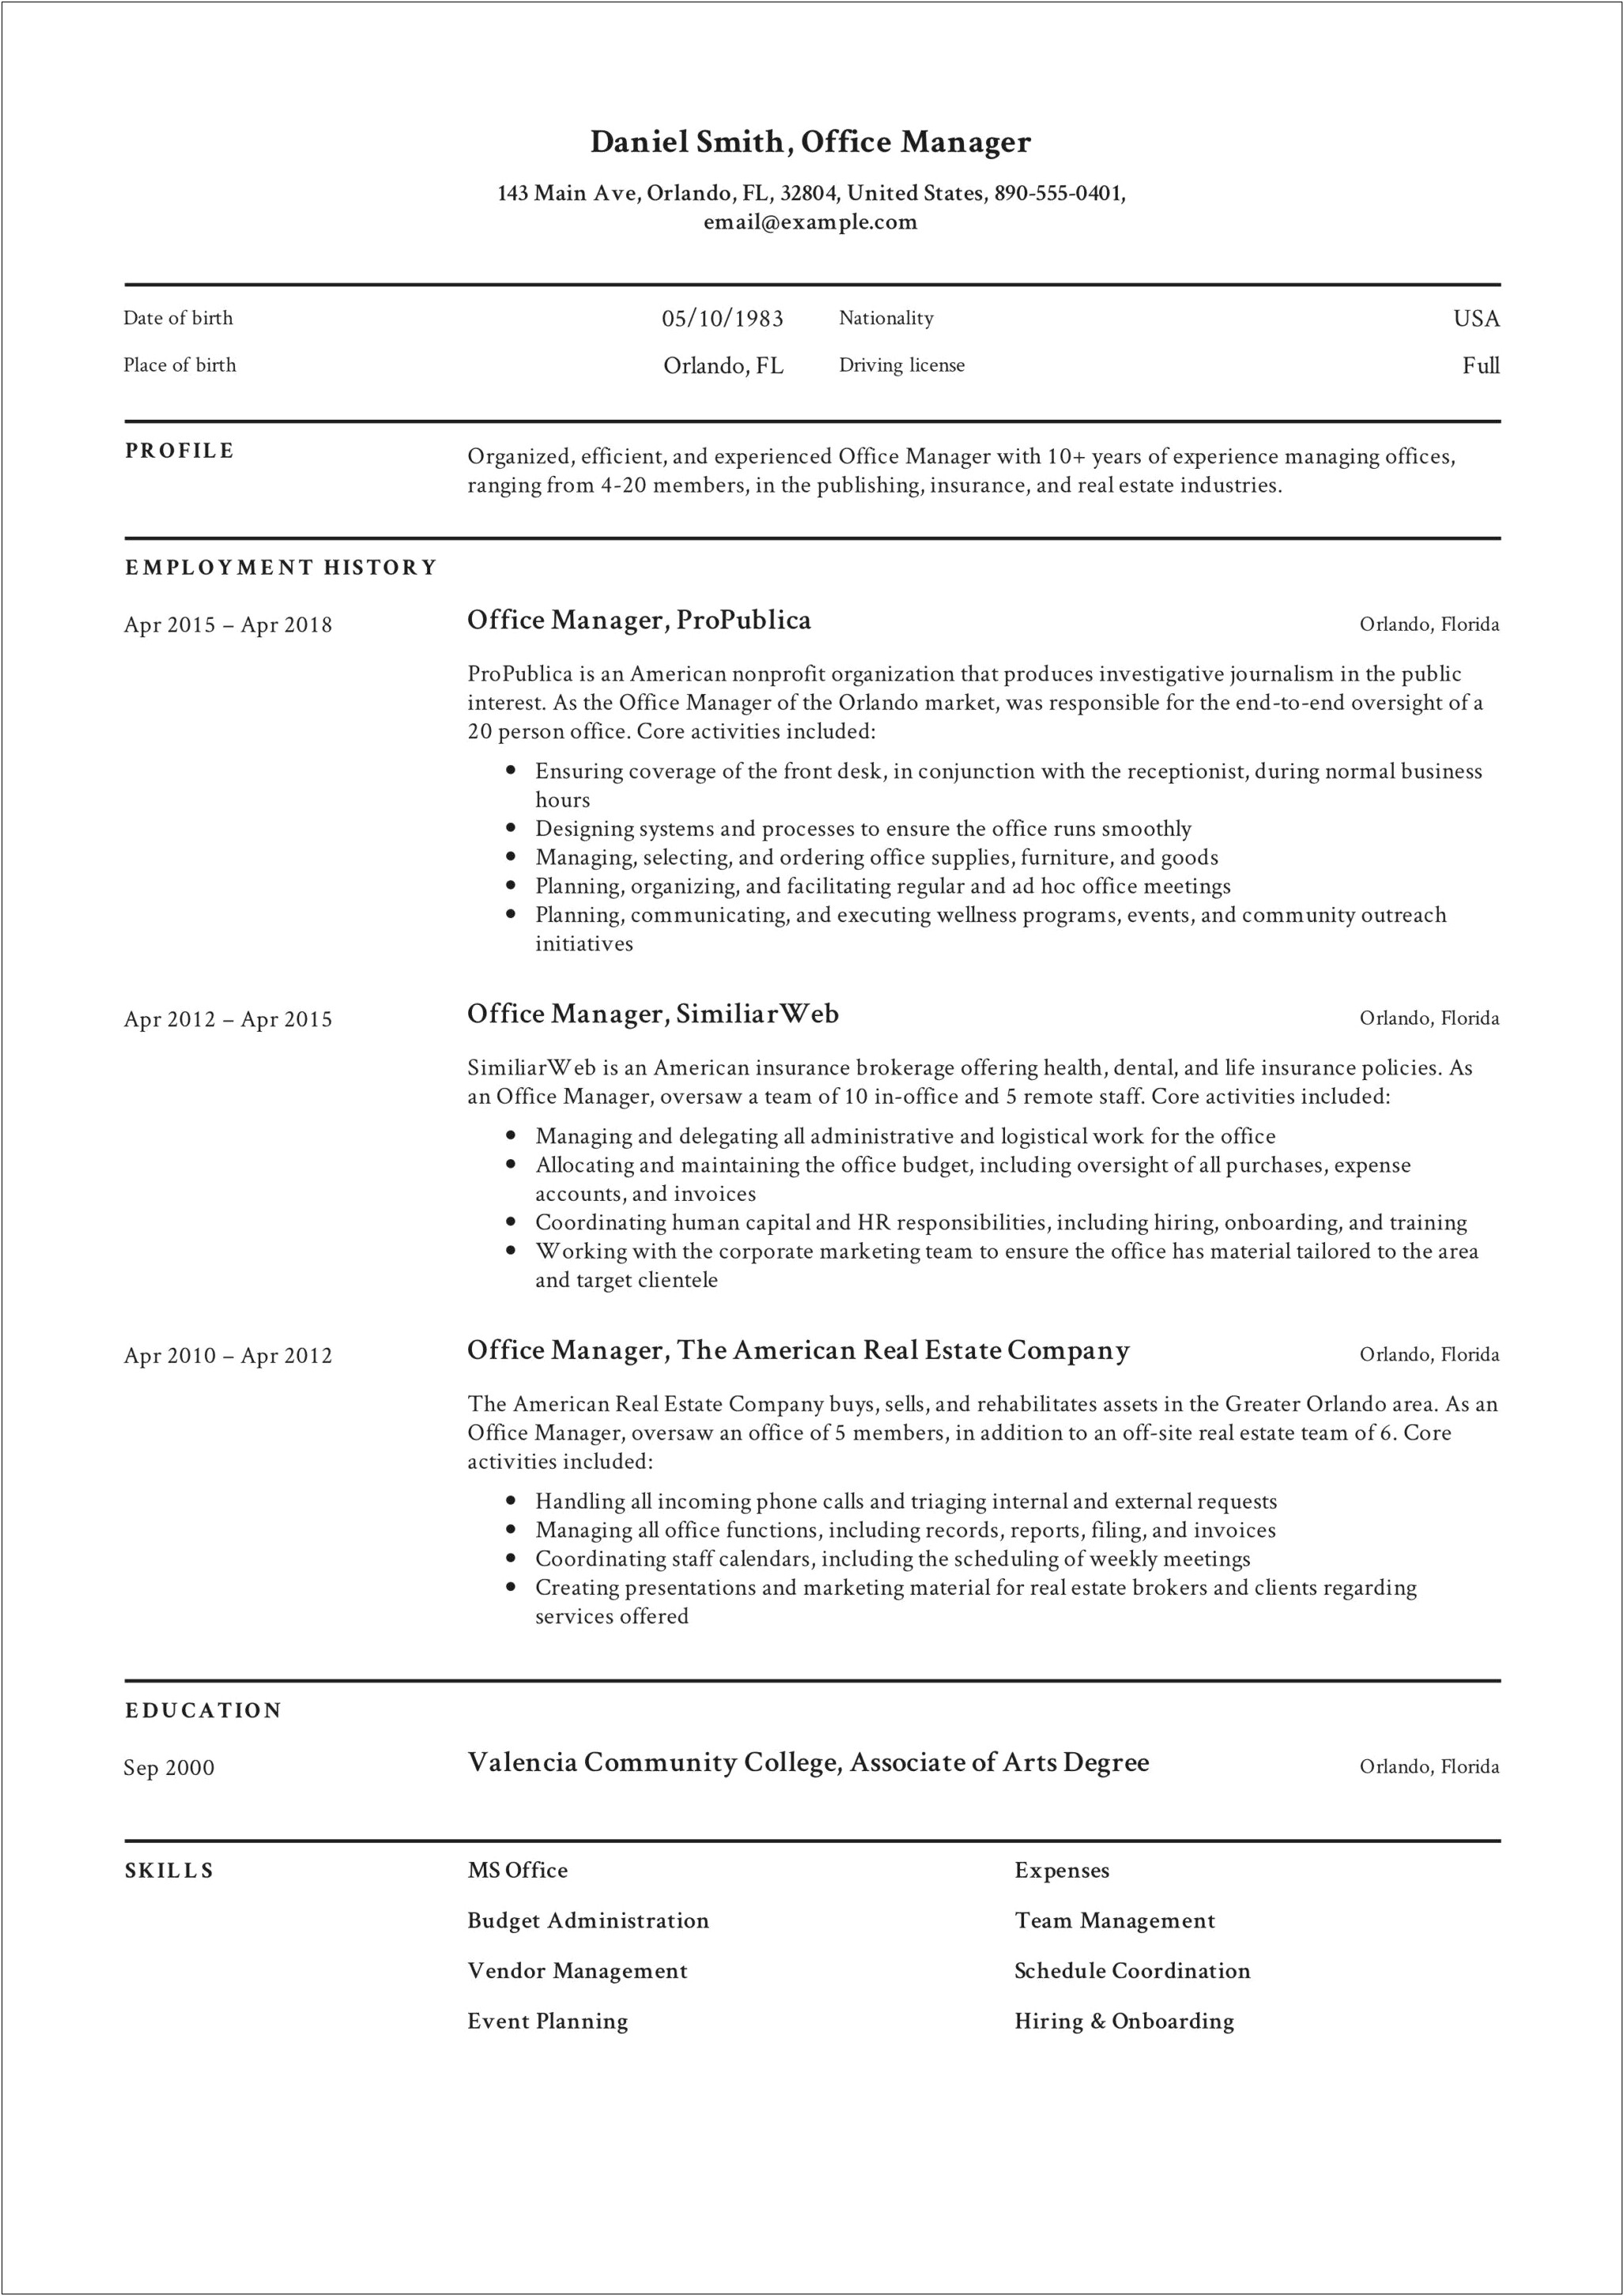 Resume Verbiage For Office Manager